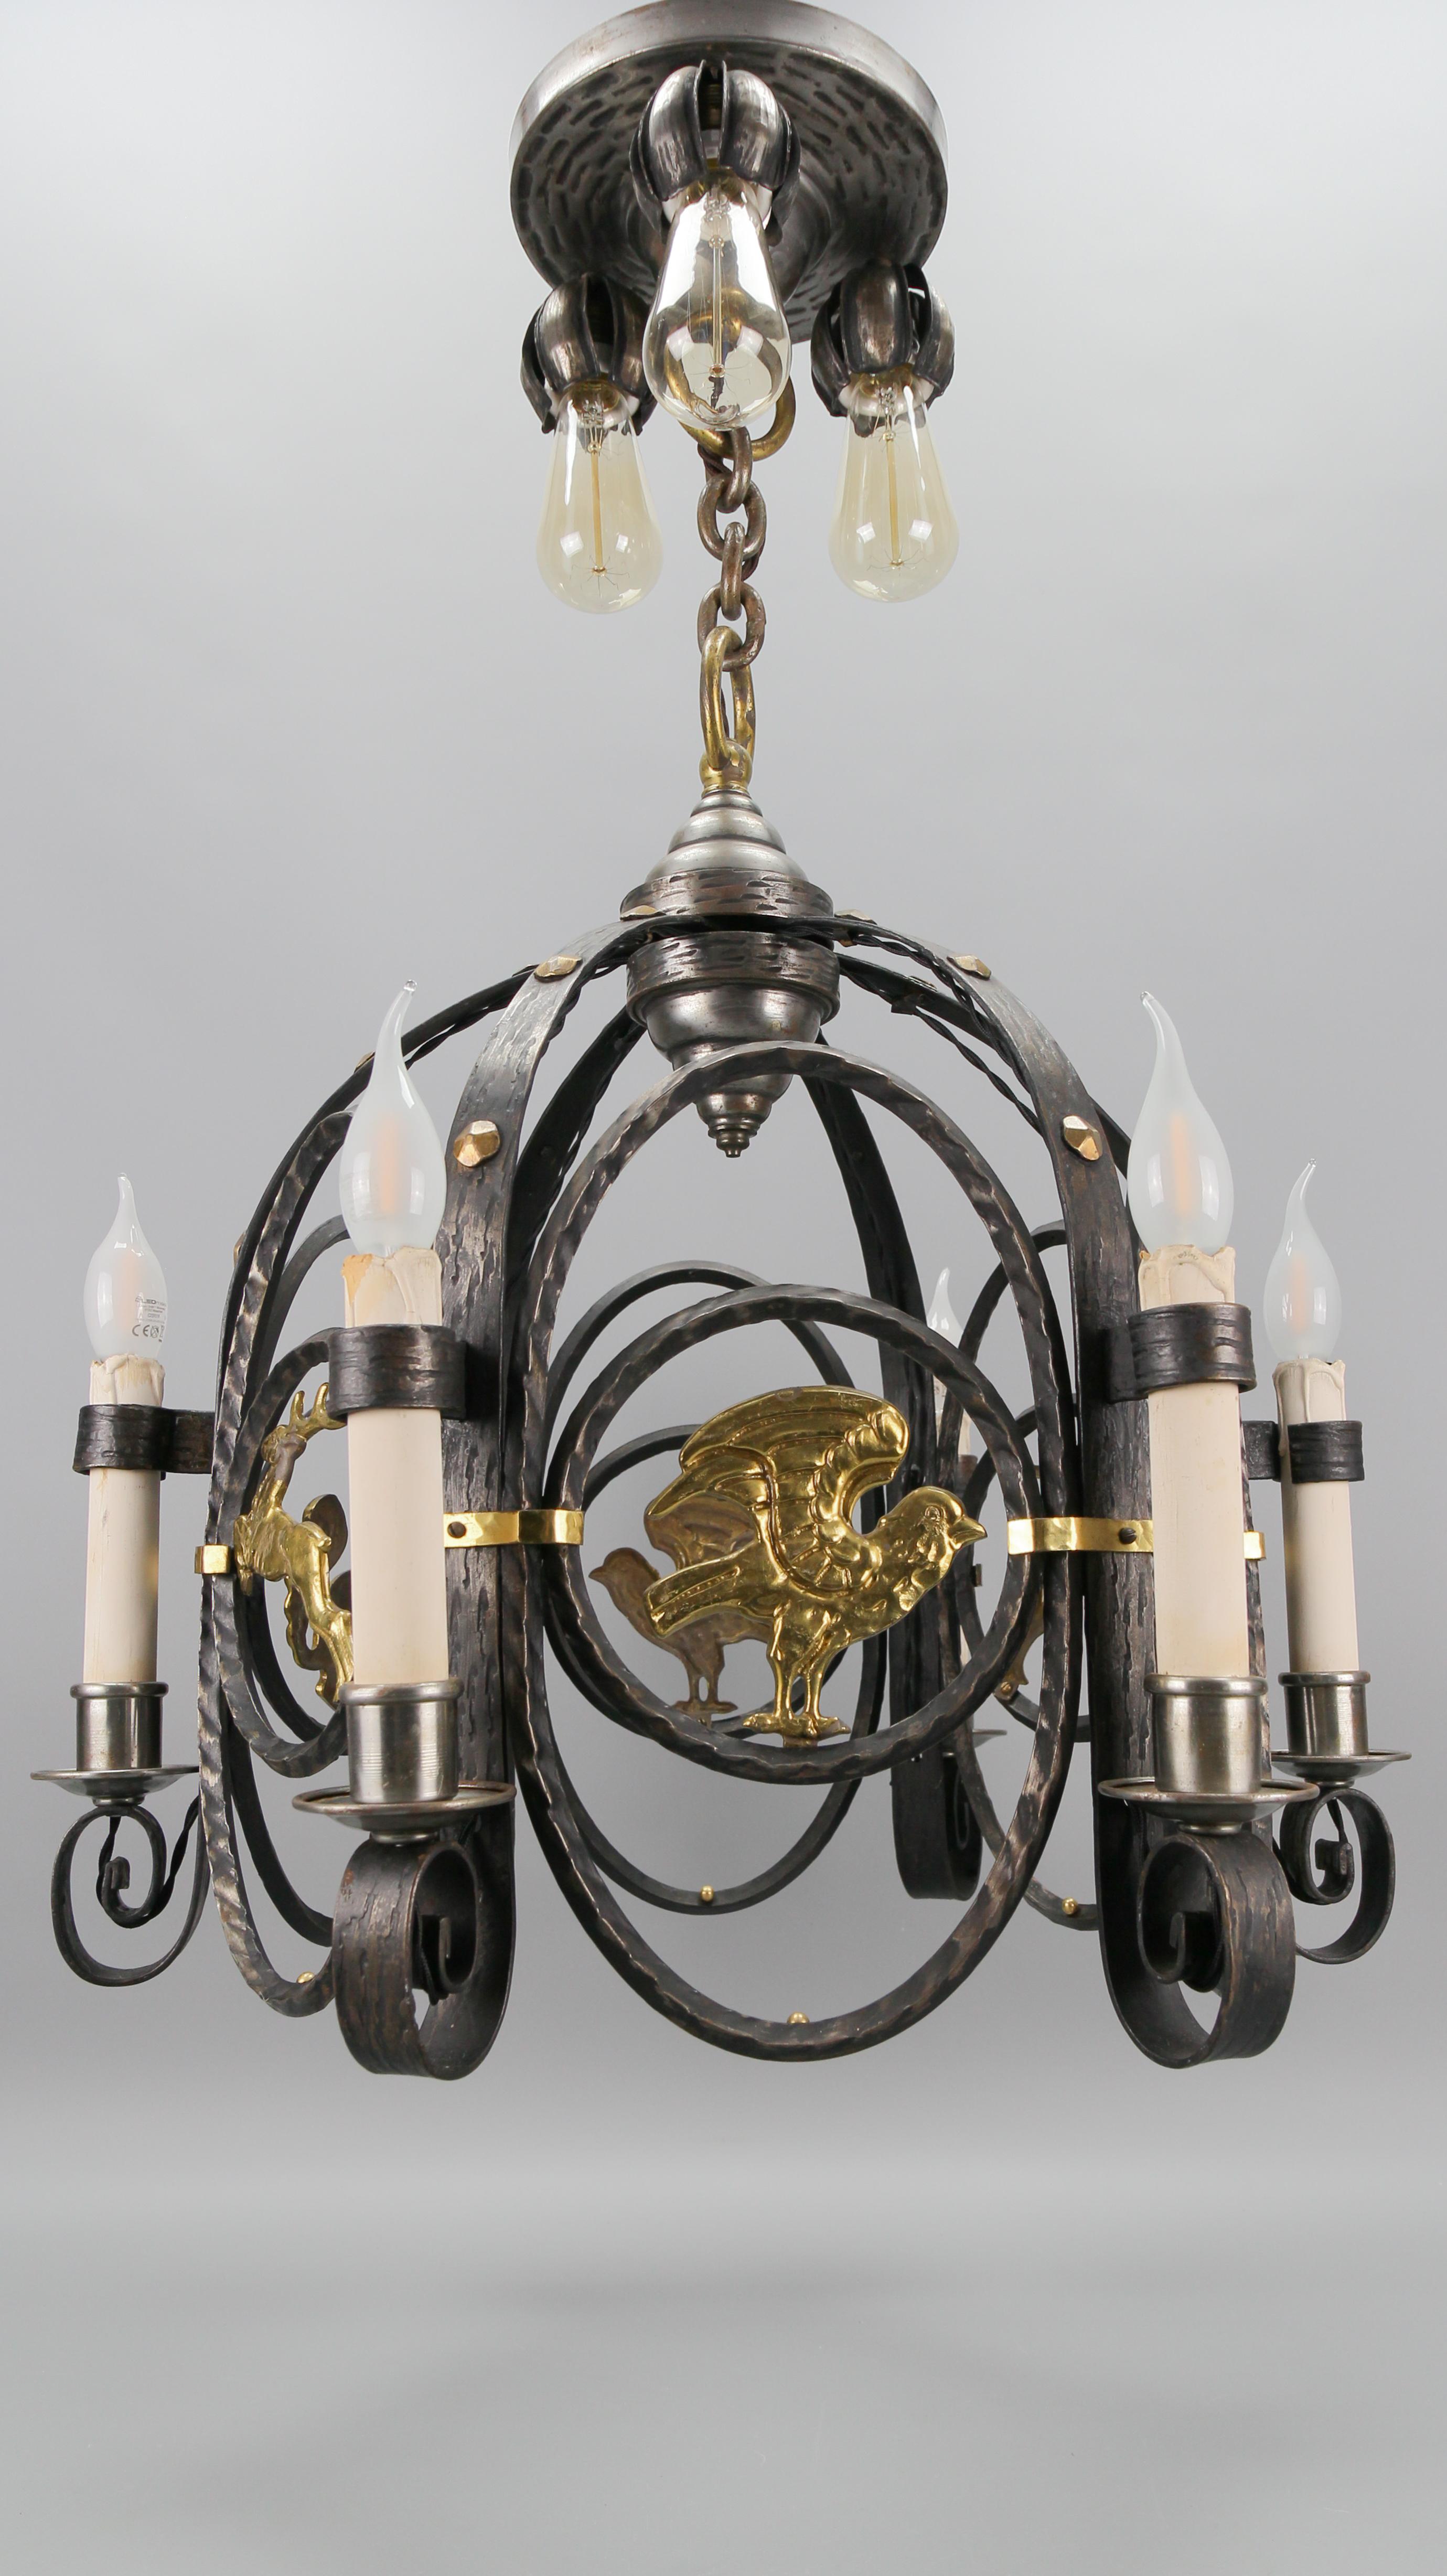 Early 20th Century German Art Deco Nine-Light Wrought Iron and Brass Chandelier with Animals, 1920s For Sale